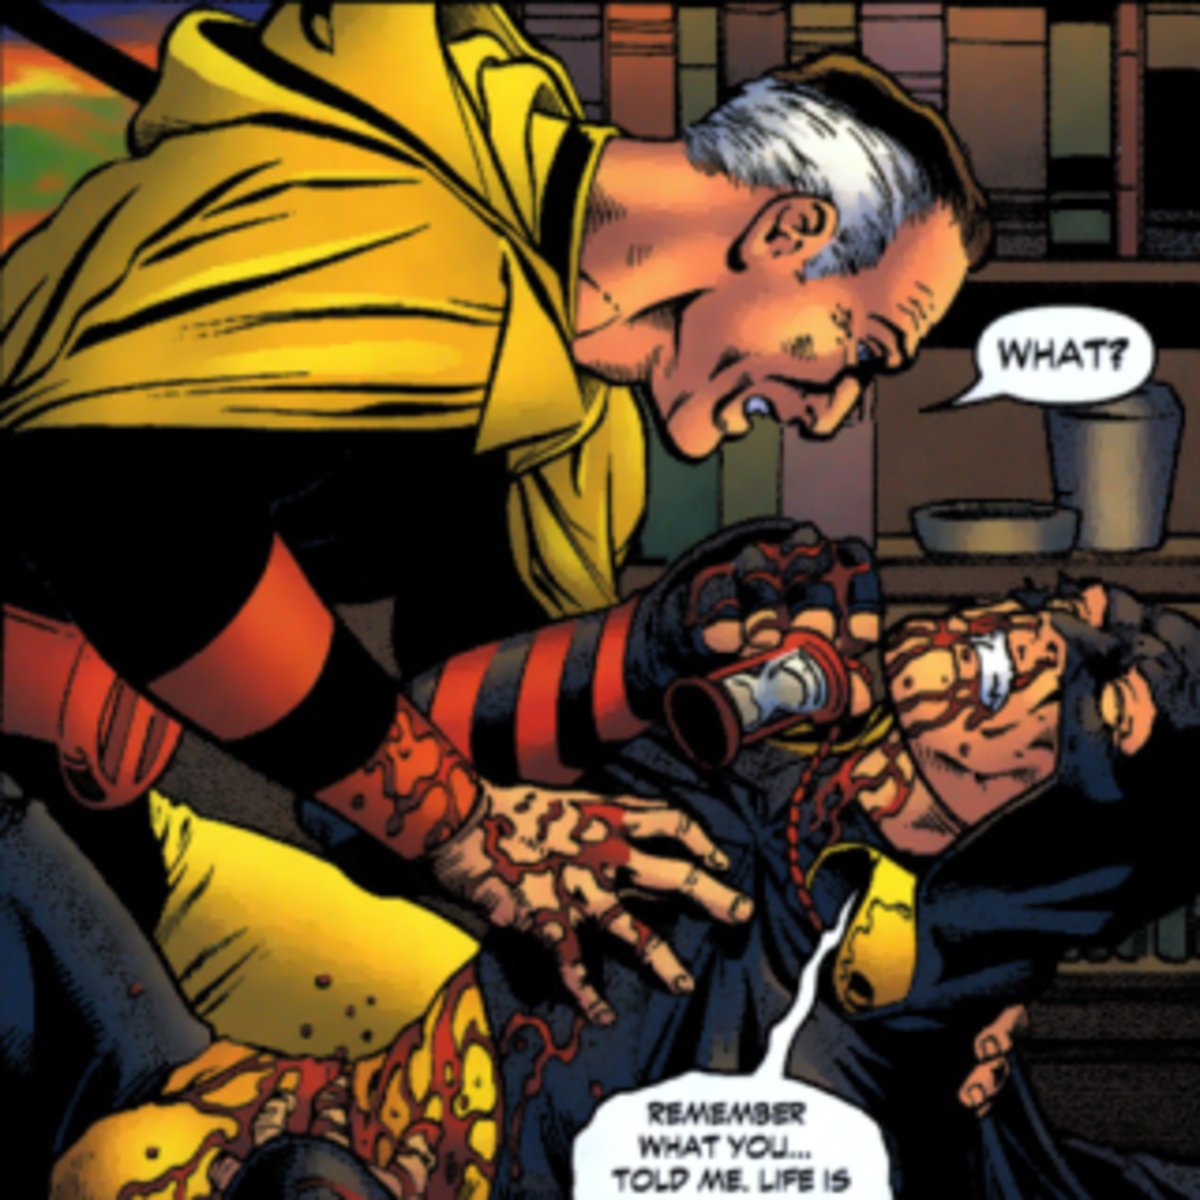 But the Hourman subplot in JSA Matt found a solution to maybe save Rex's life pulling him from the time stream the problem though was that he could only be there for an hour before going back, Rick would go there for advice and a chance to see his Dad again.